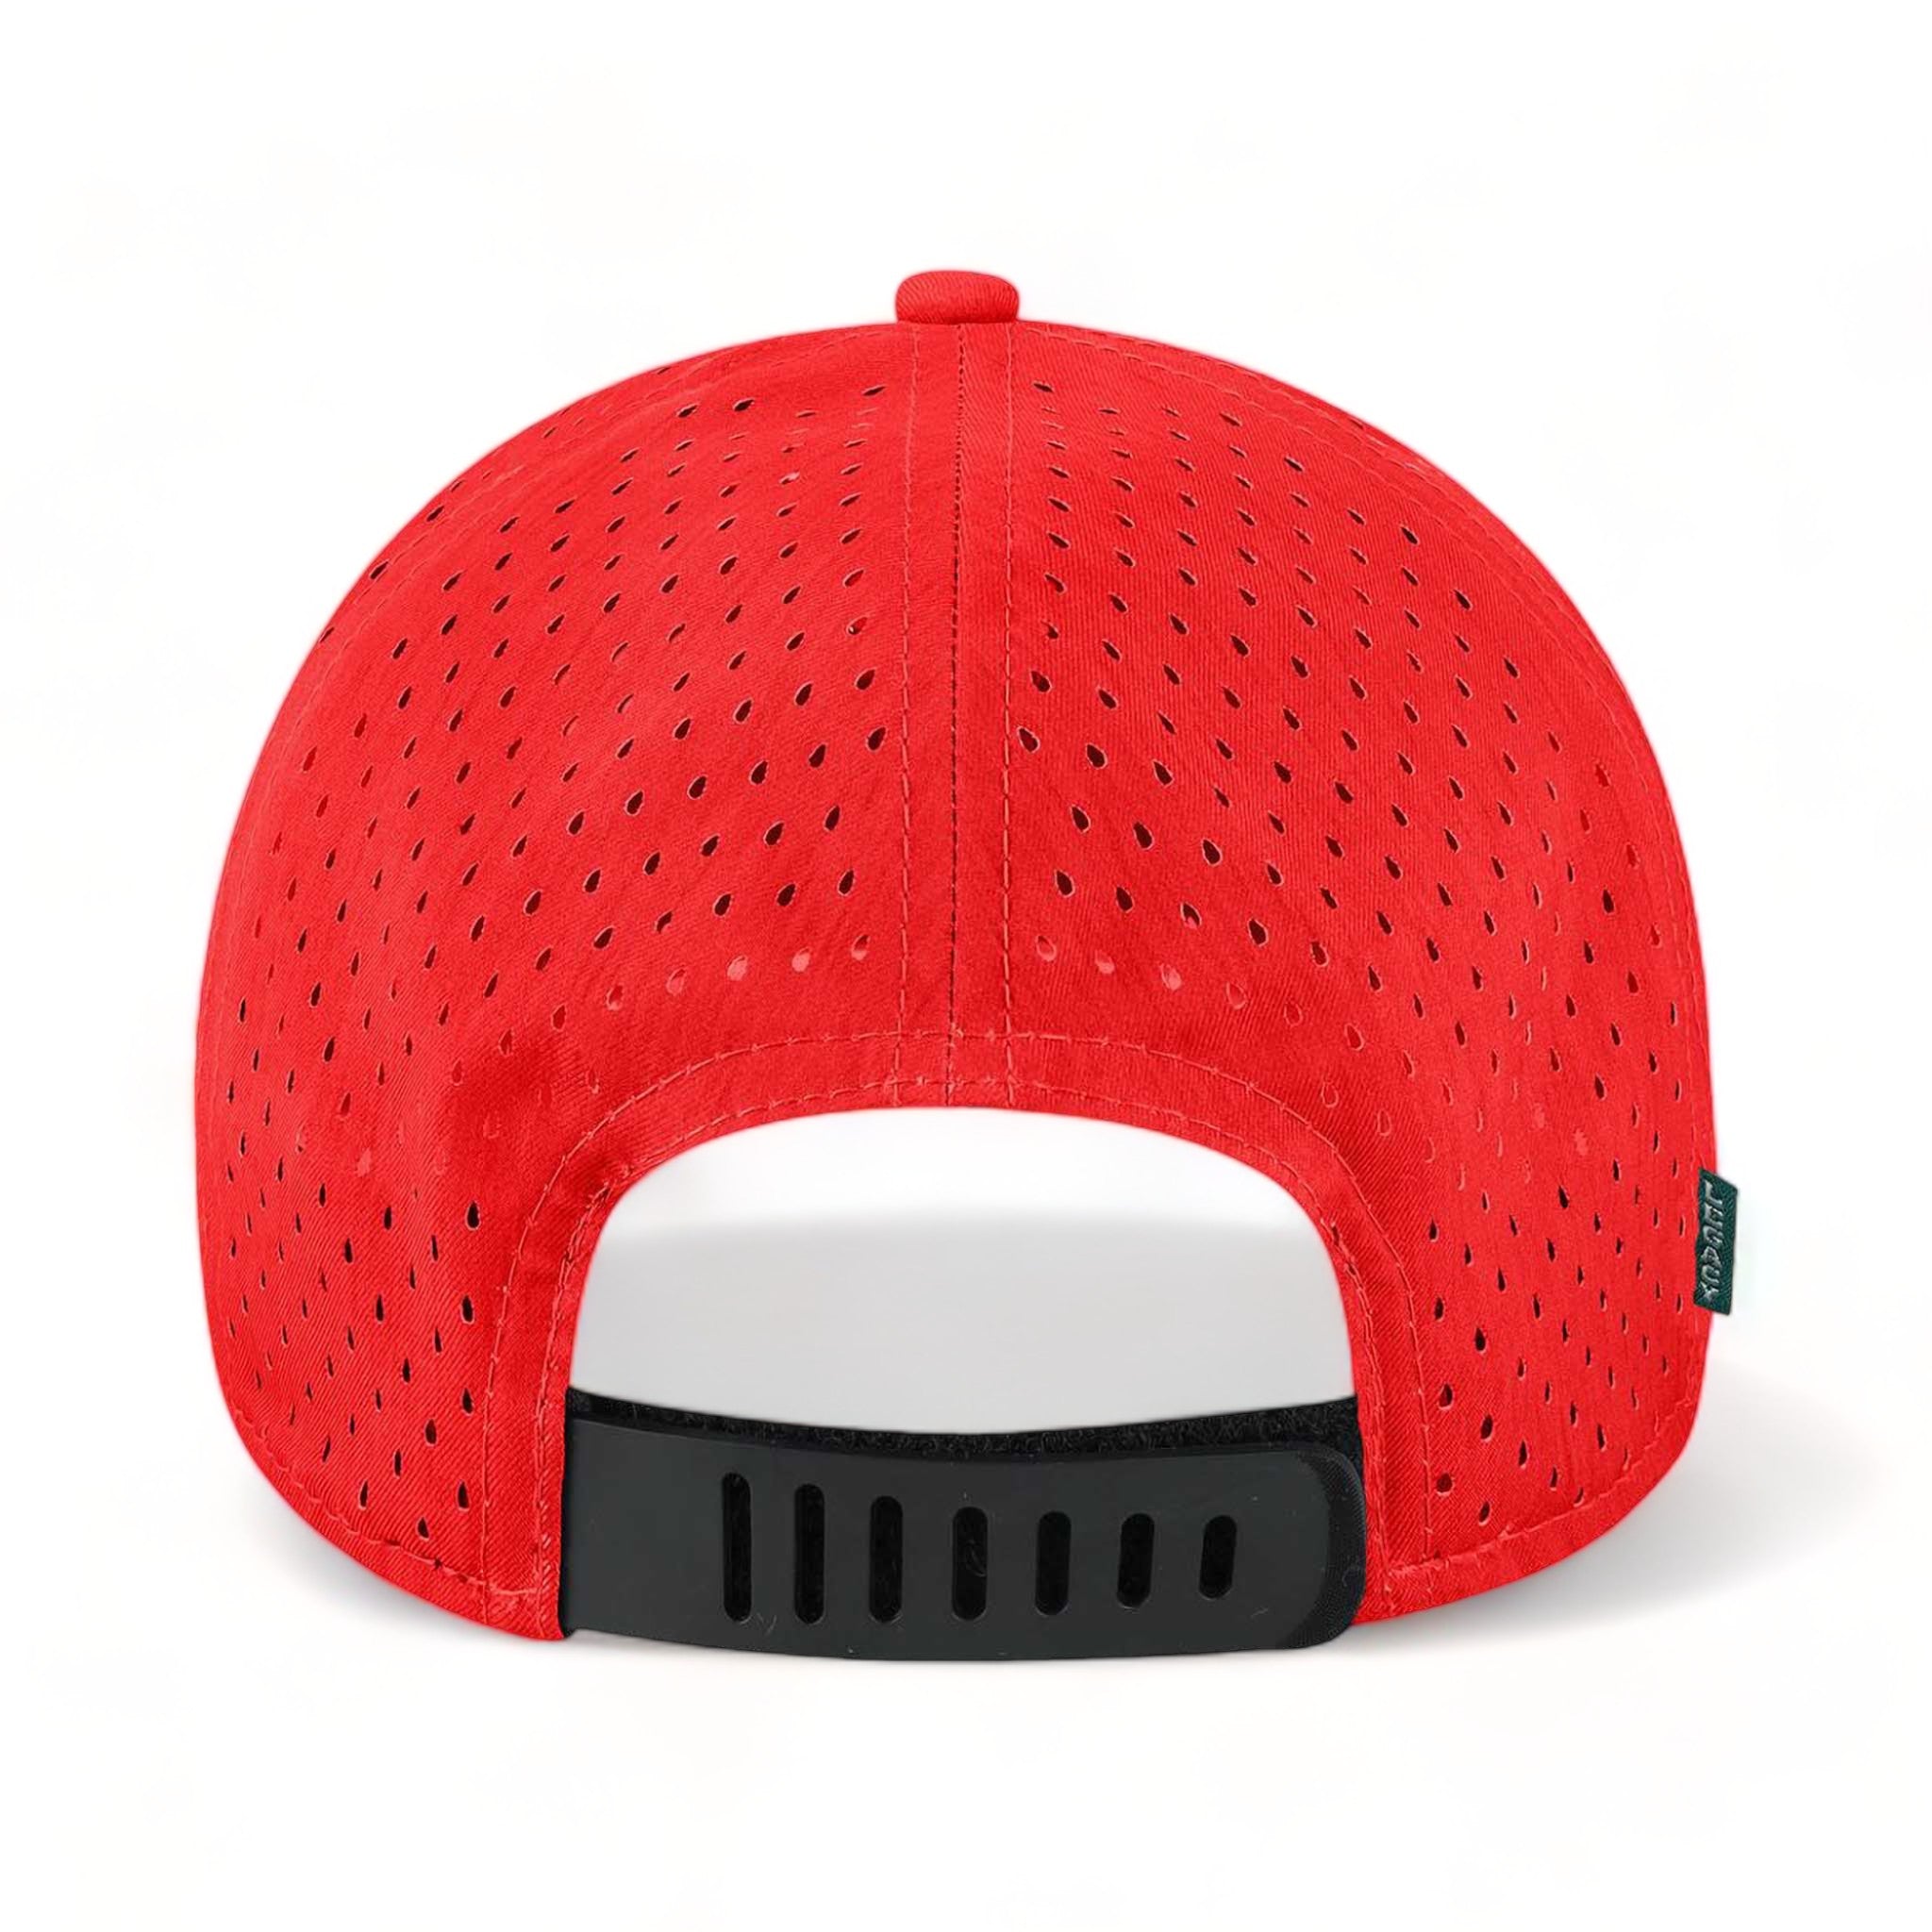 Back view of LEGACY REMPA custom hat in eco scarlet red